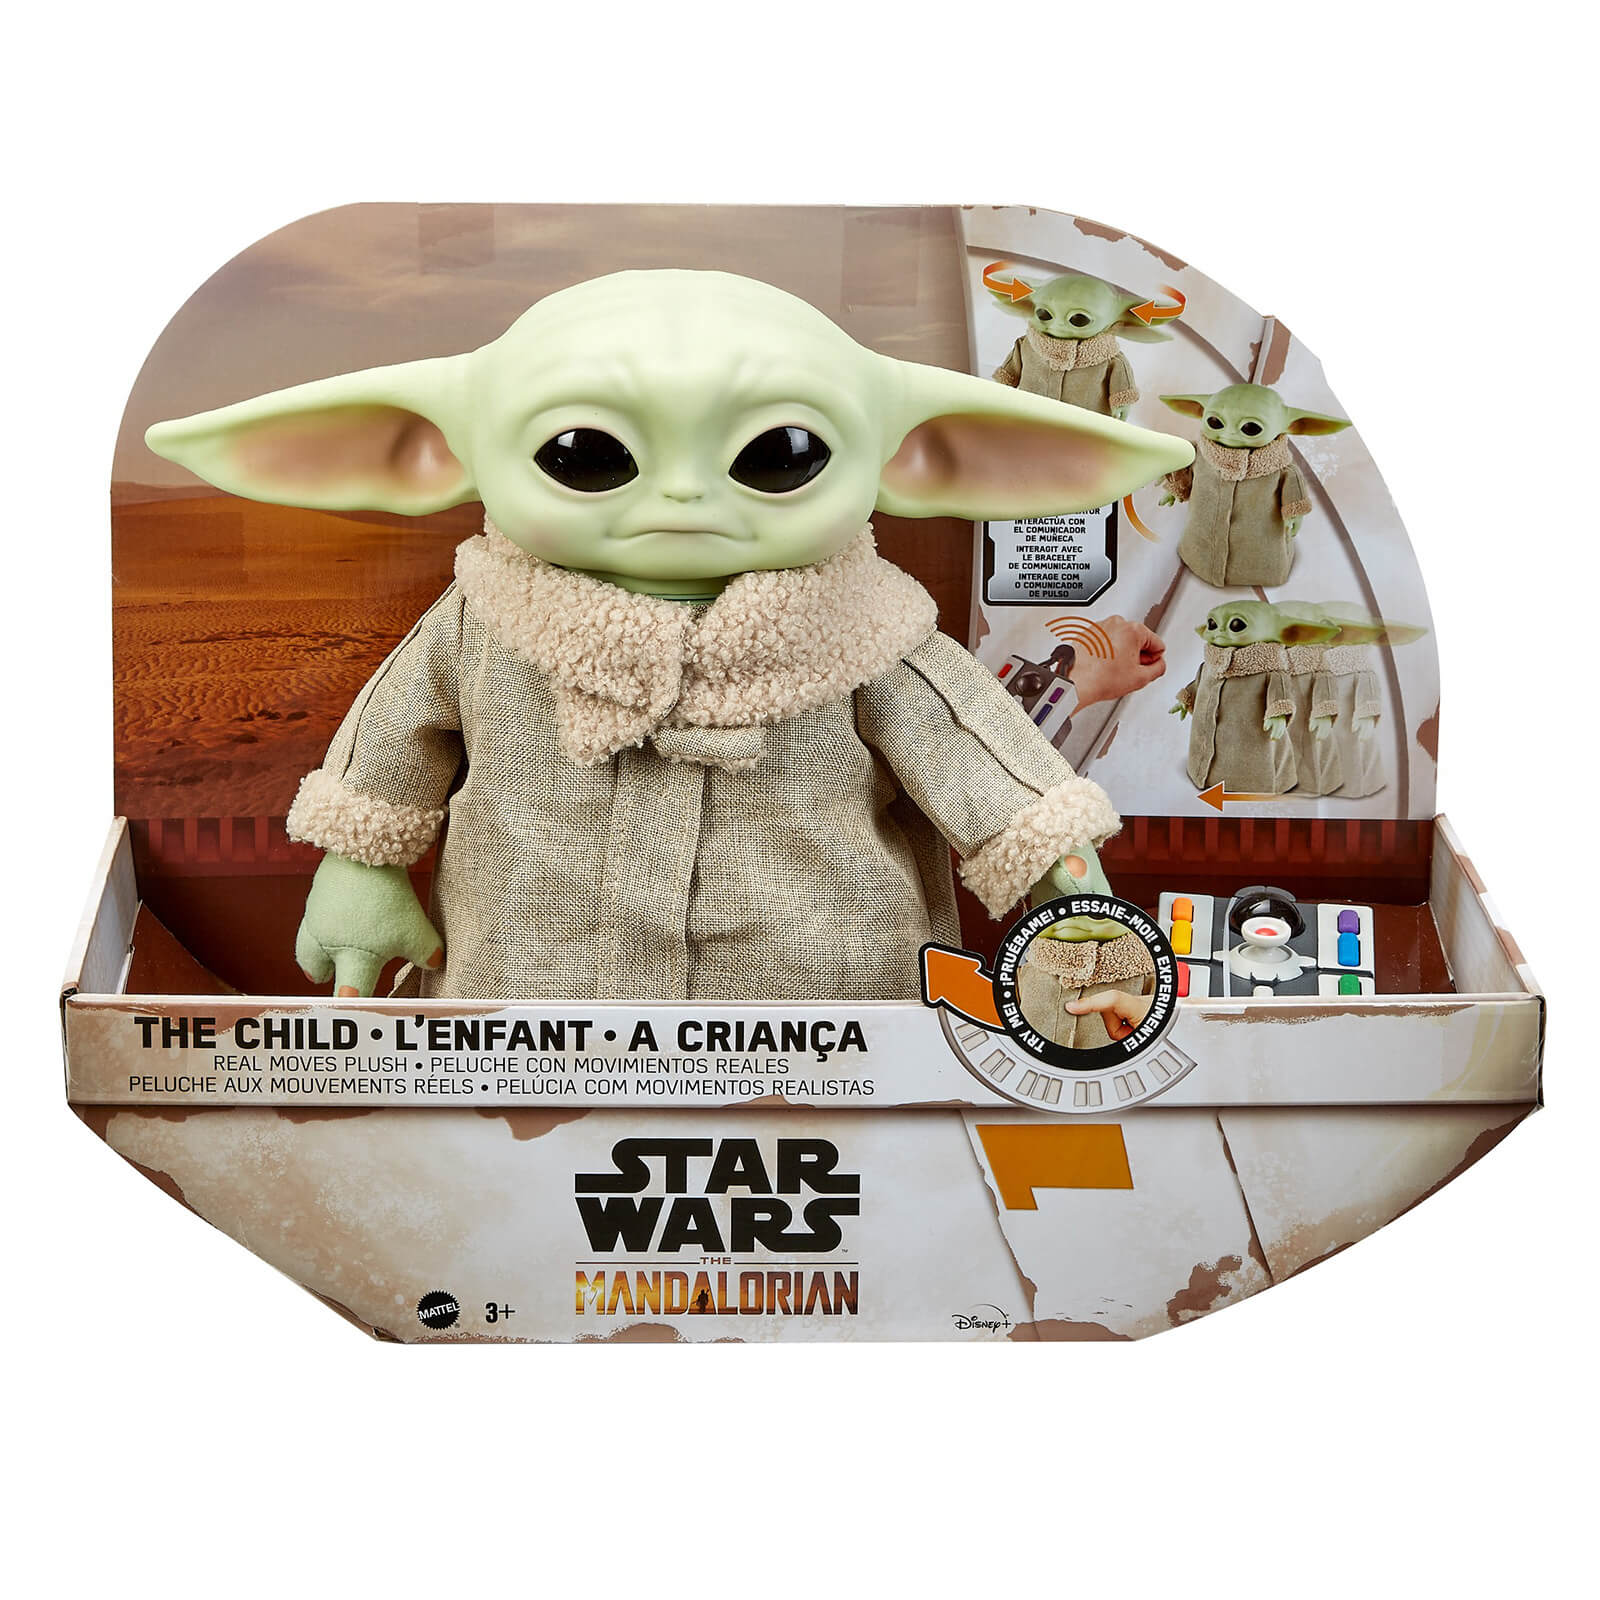 Star Wars The Child Feature Plush